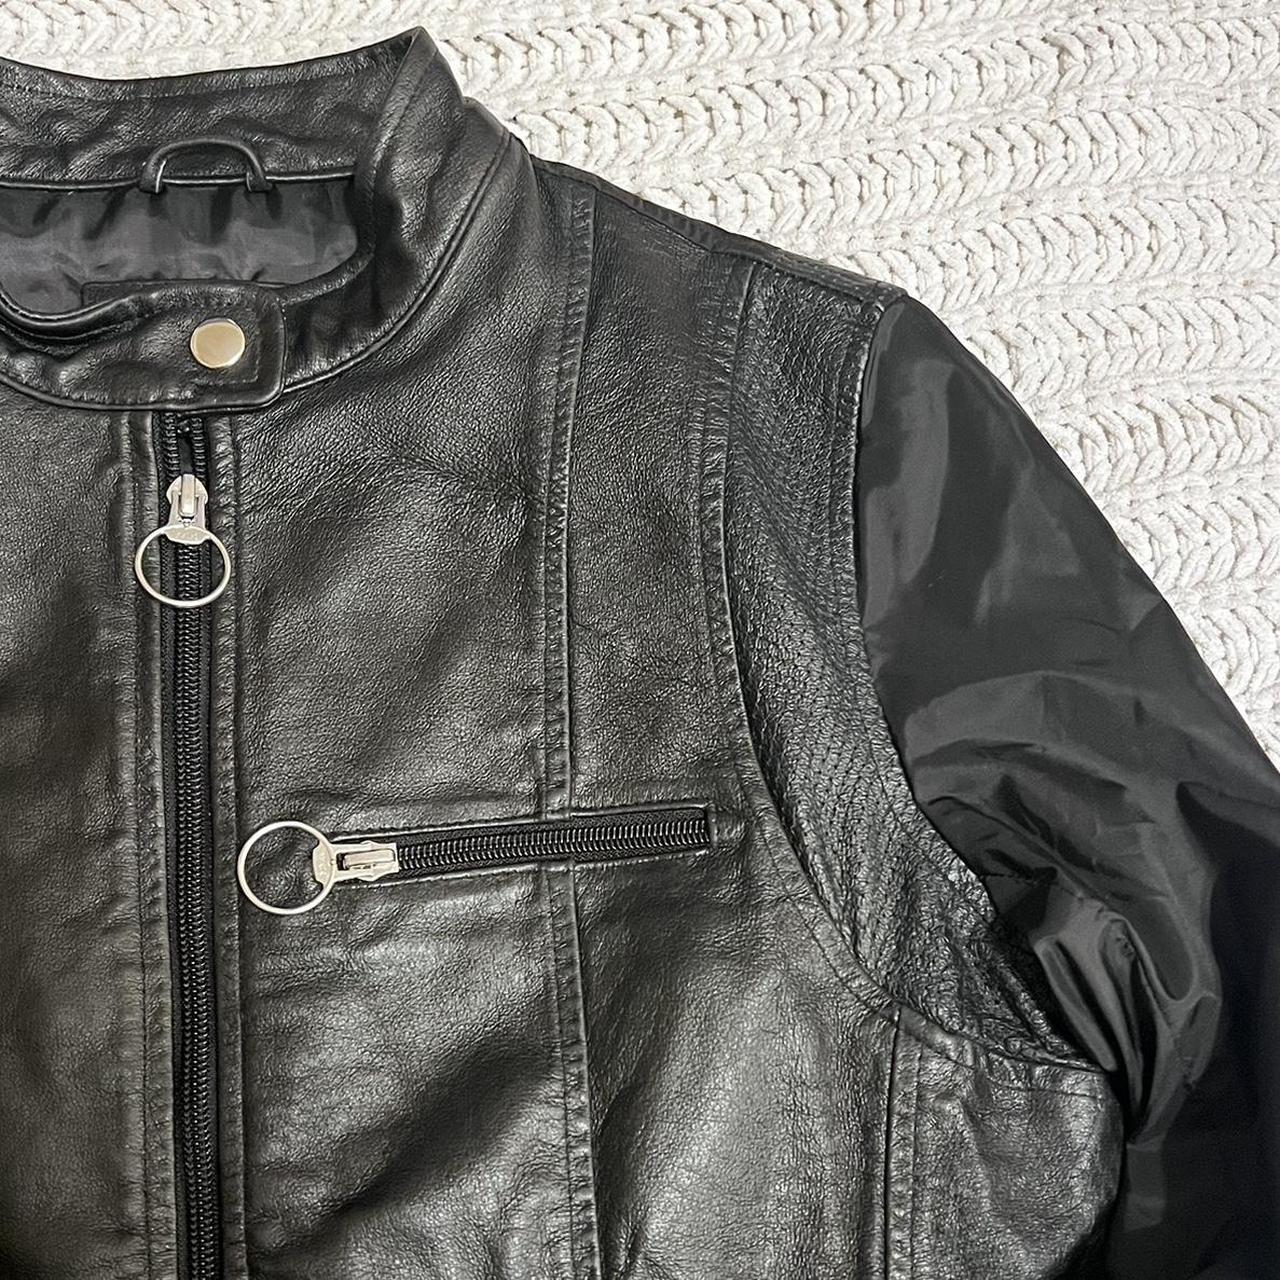 Wilson’s Leather Women's Black and White Jacket (5)